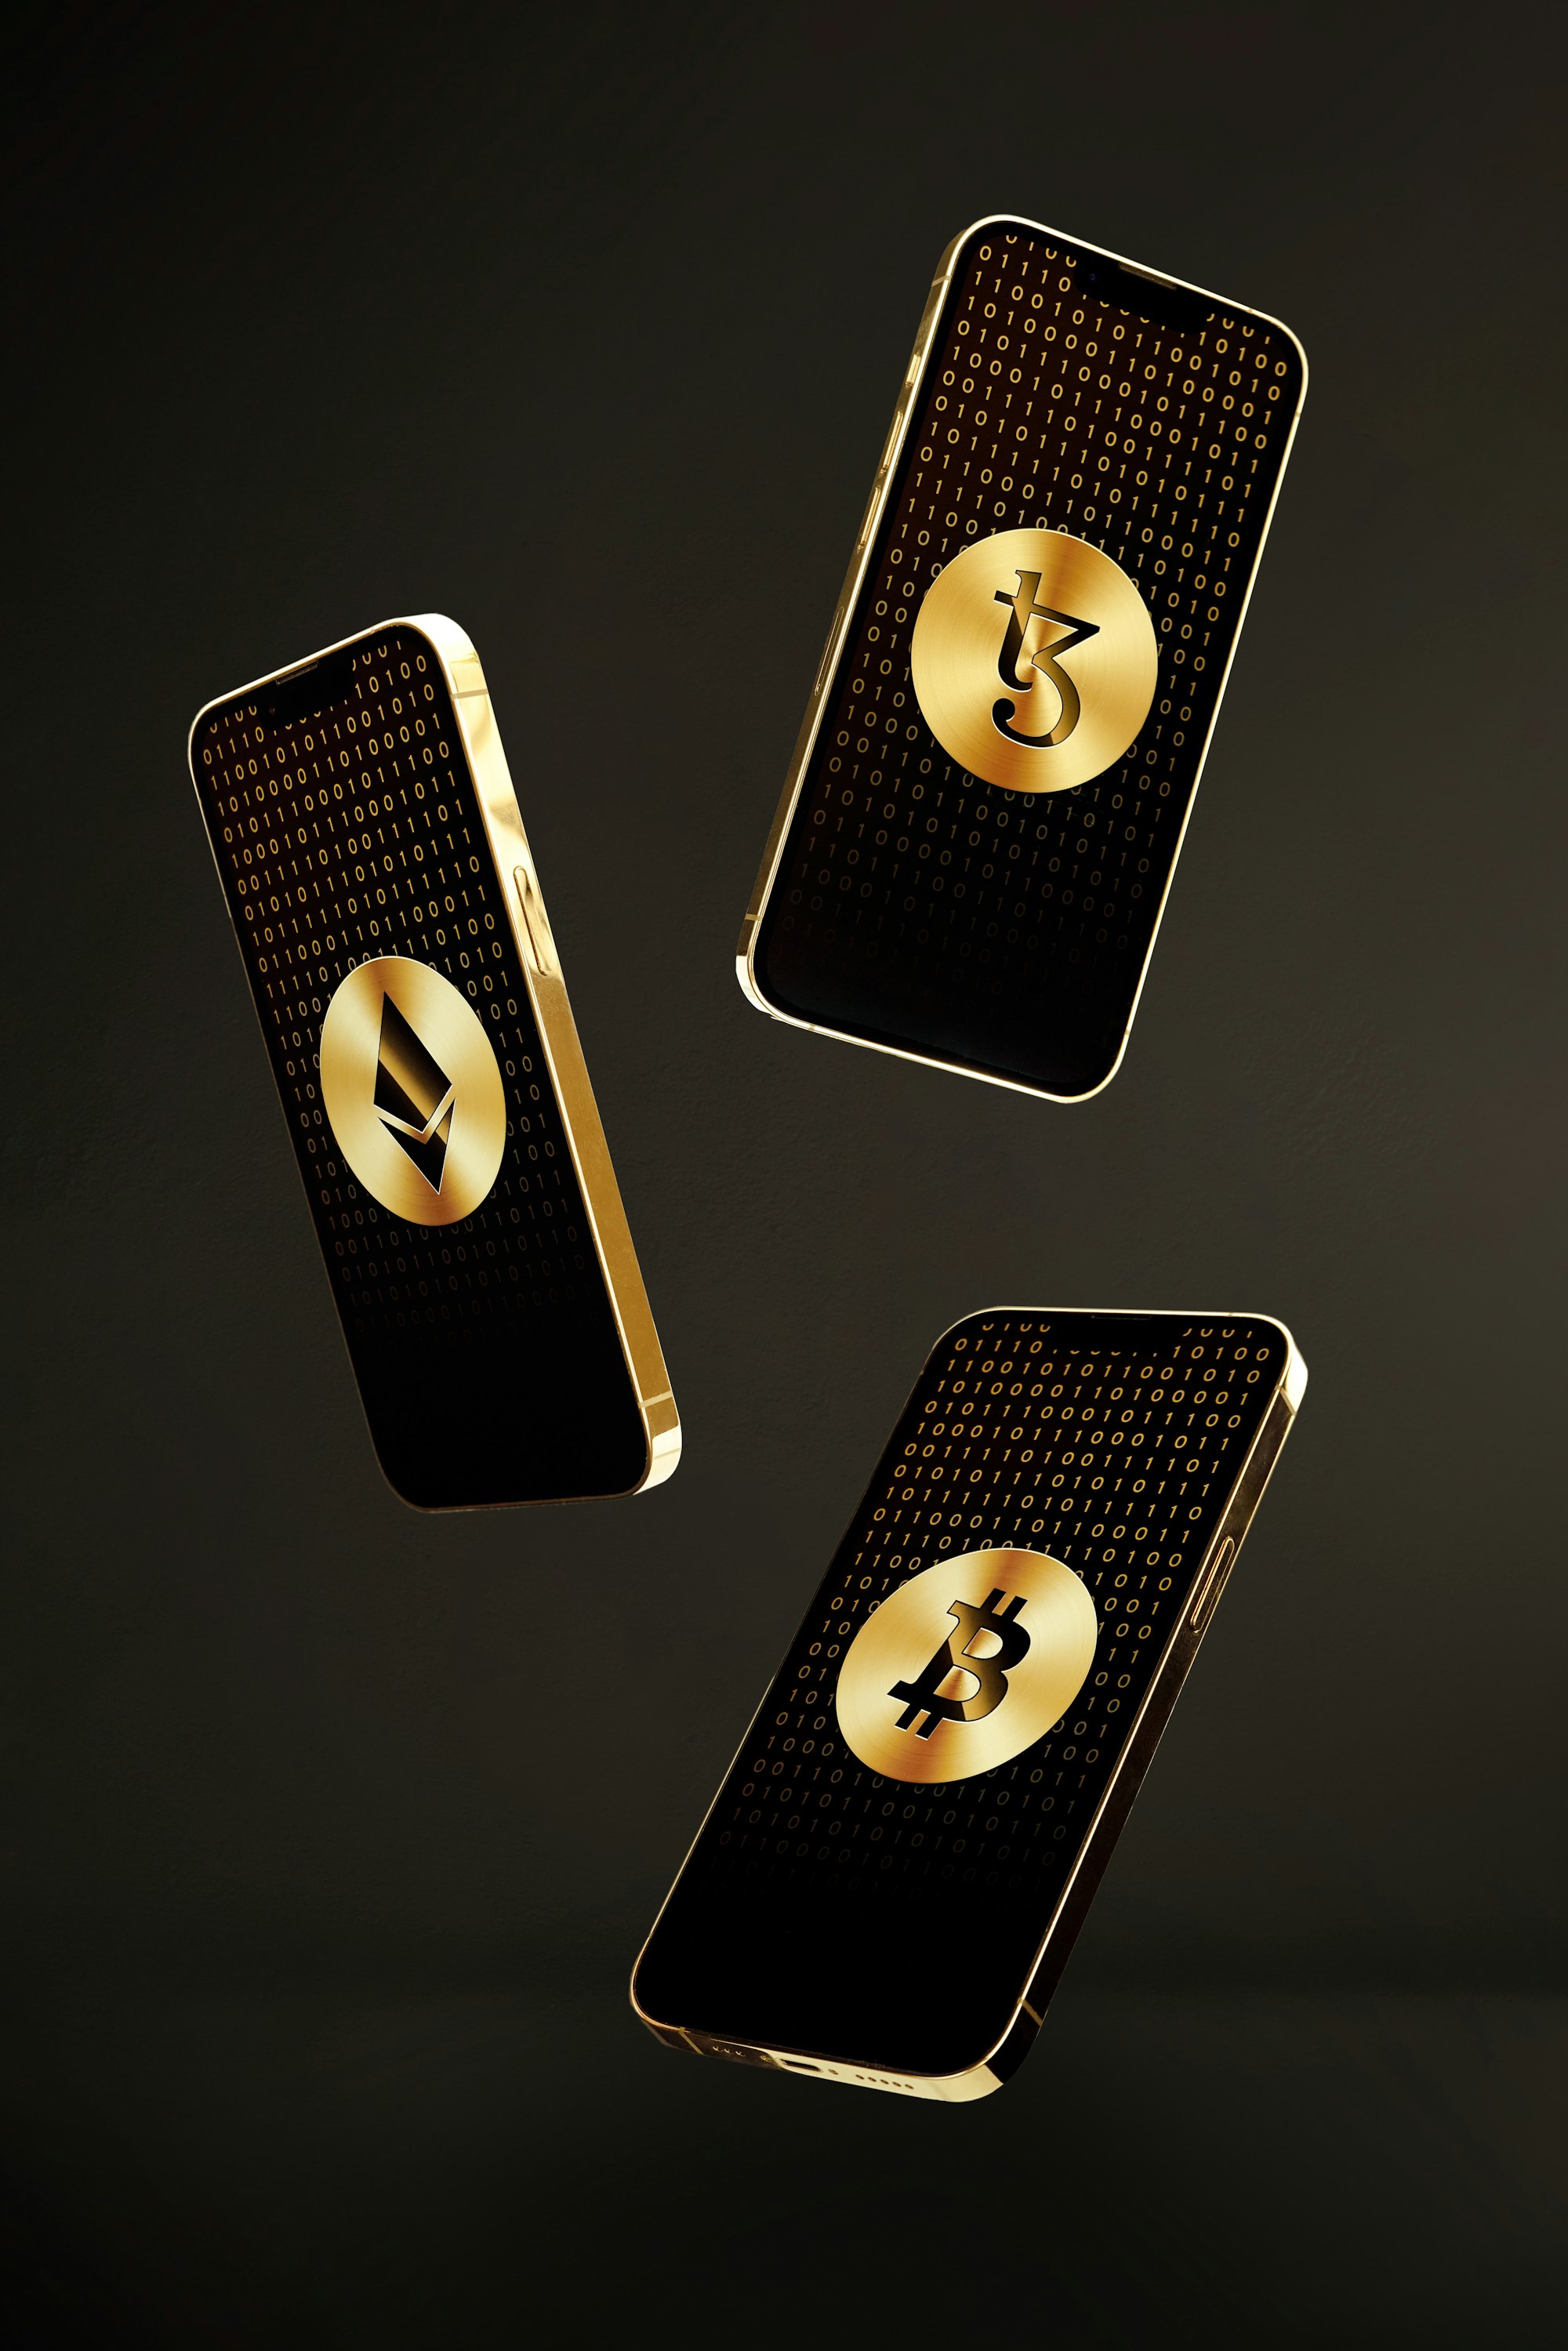 Gold iPhones with gold Ethereum, Tezos and Bitcoin coins